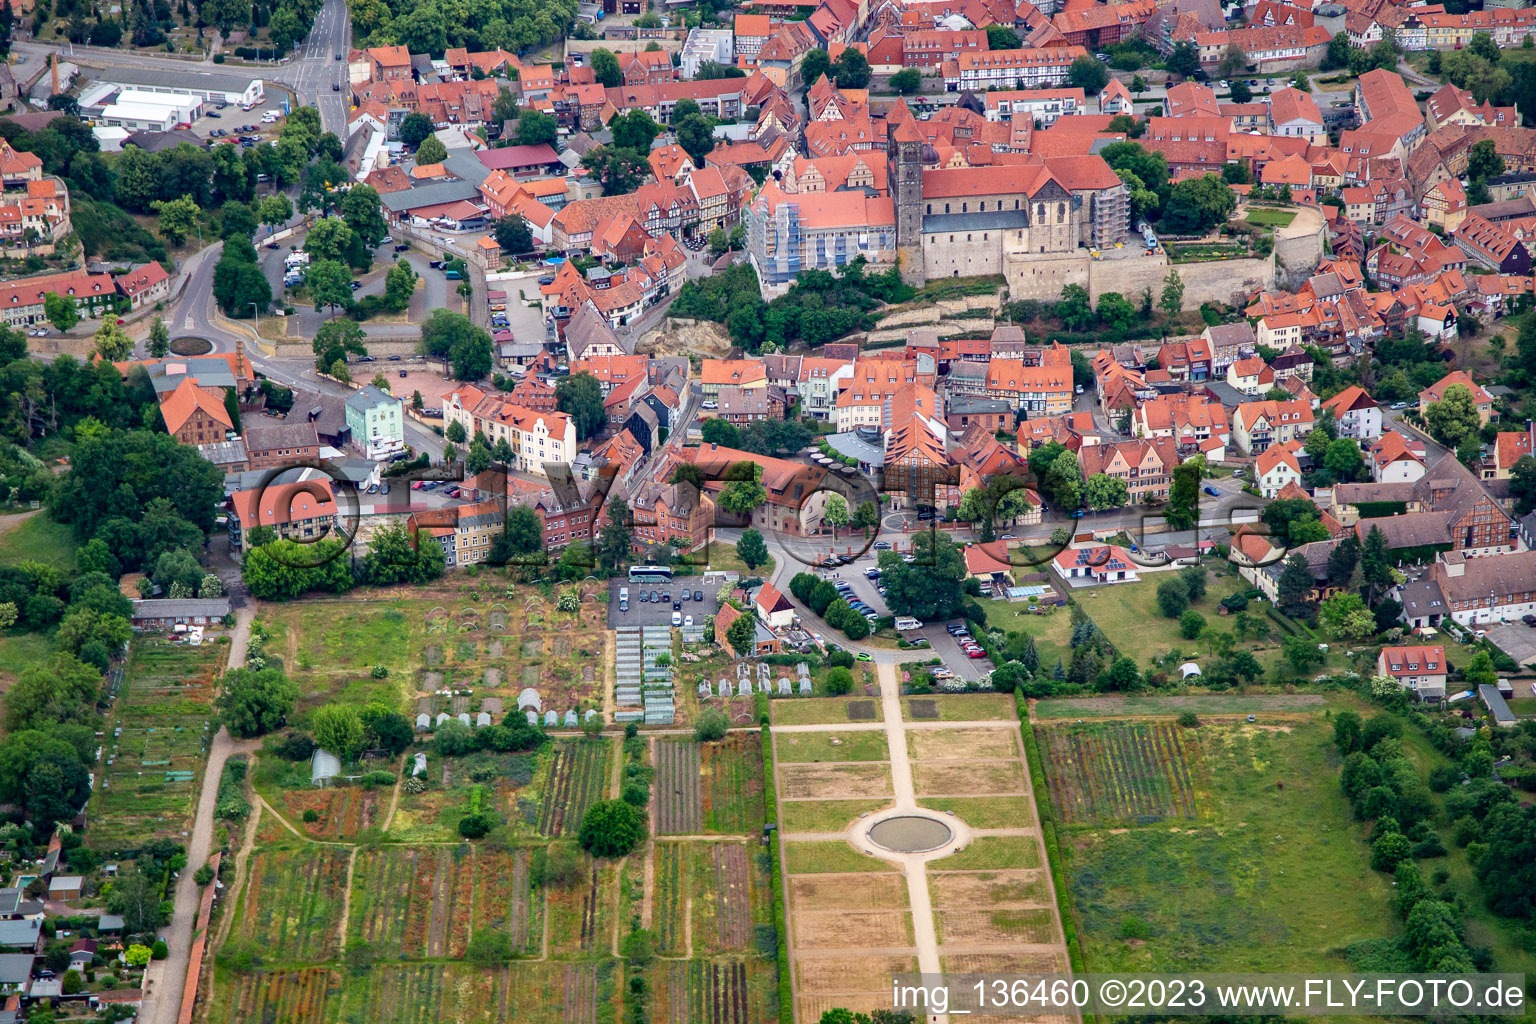 Aerial photograpy of Collegiate Church of St. Servatii in Quedlinburg in the state Saxony-Anhalt, Germany